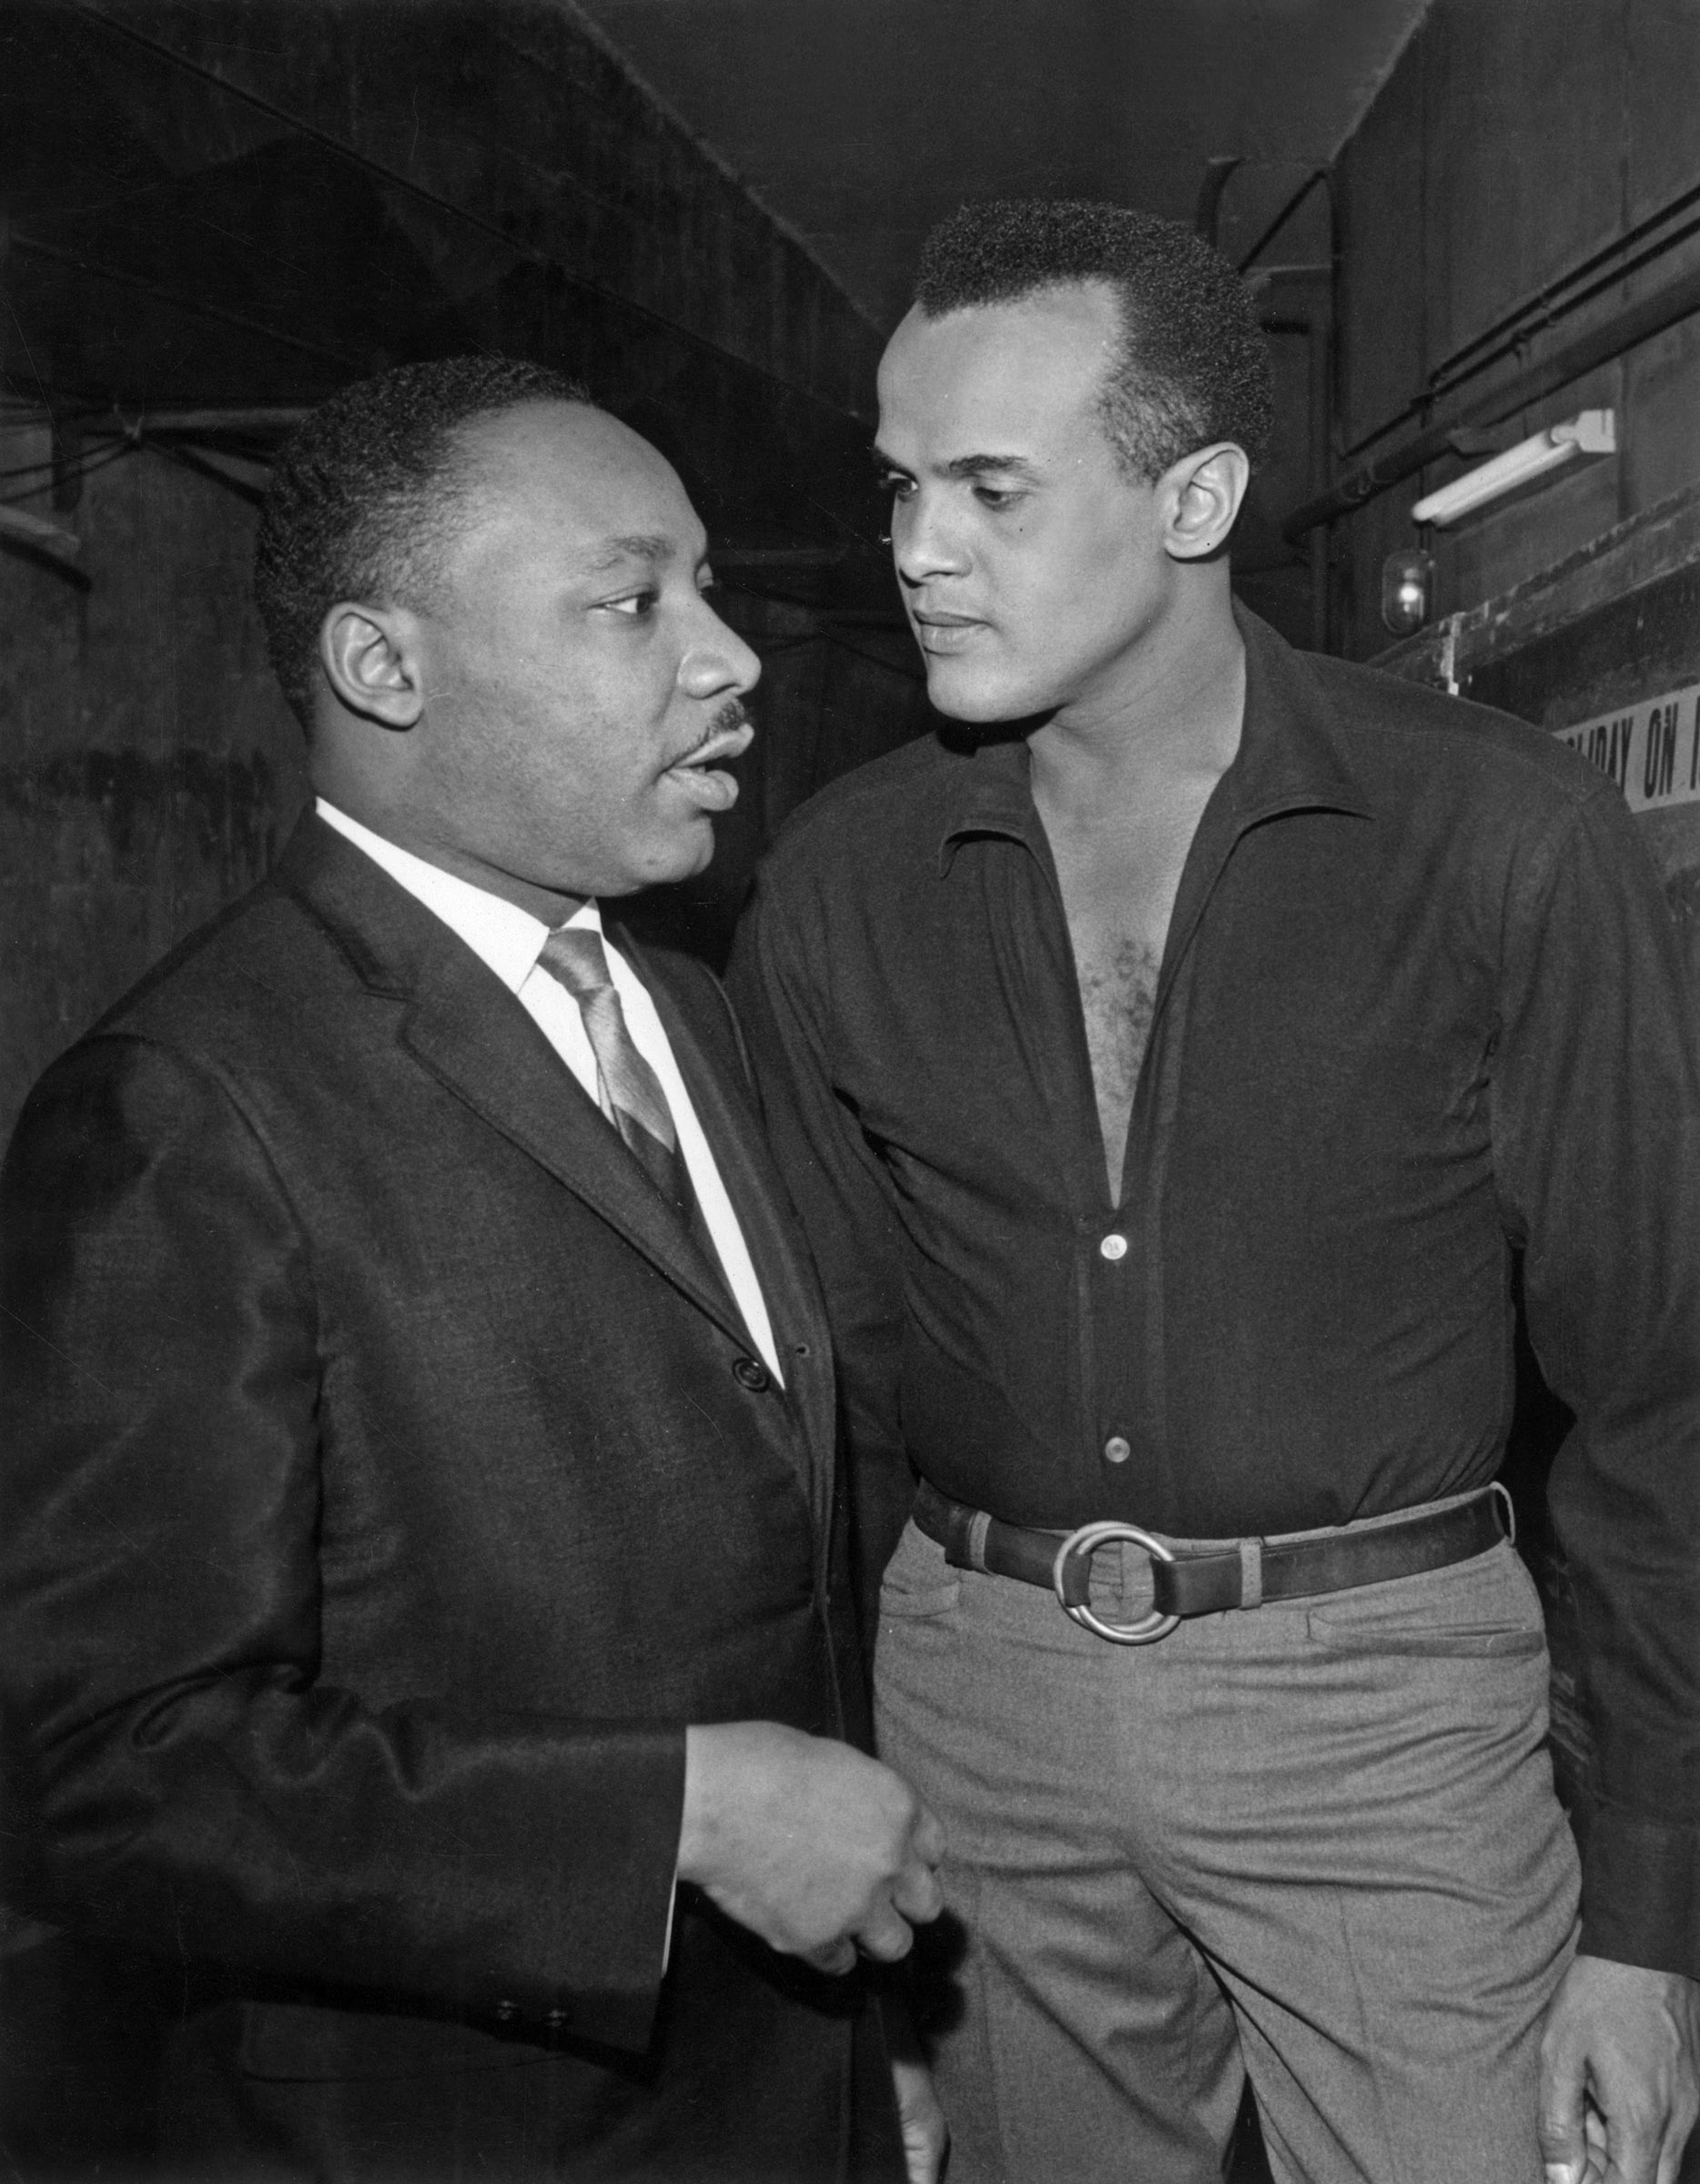 Martin Luther King Jr. and Harry Belafonte in Paris for a US civil rights gala, March 29, 1966 © AGI